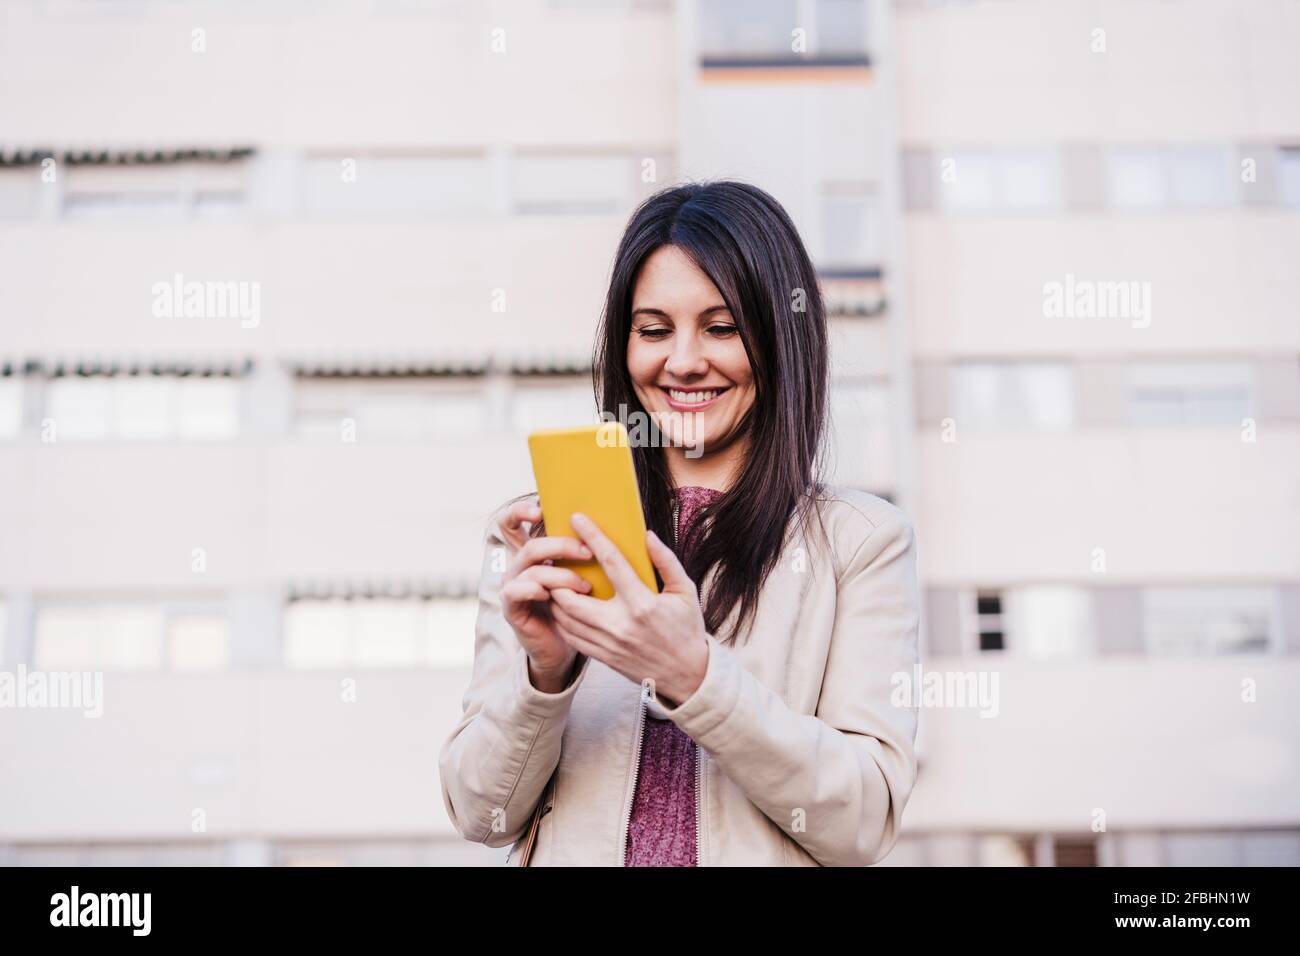 Contented woman using mobile phone while smiling Stock Photo